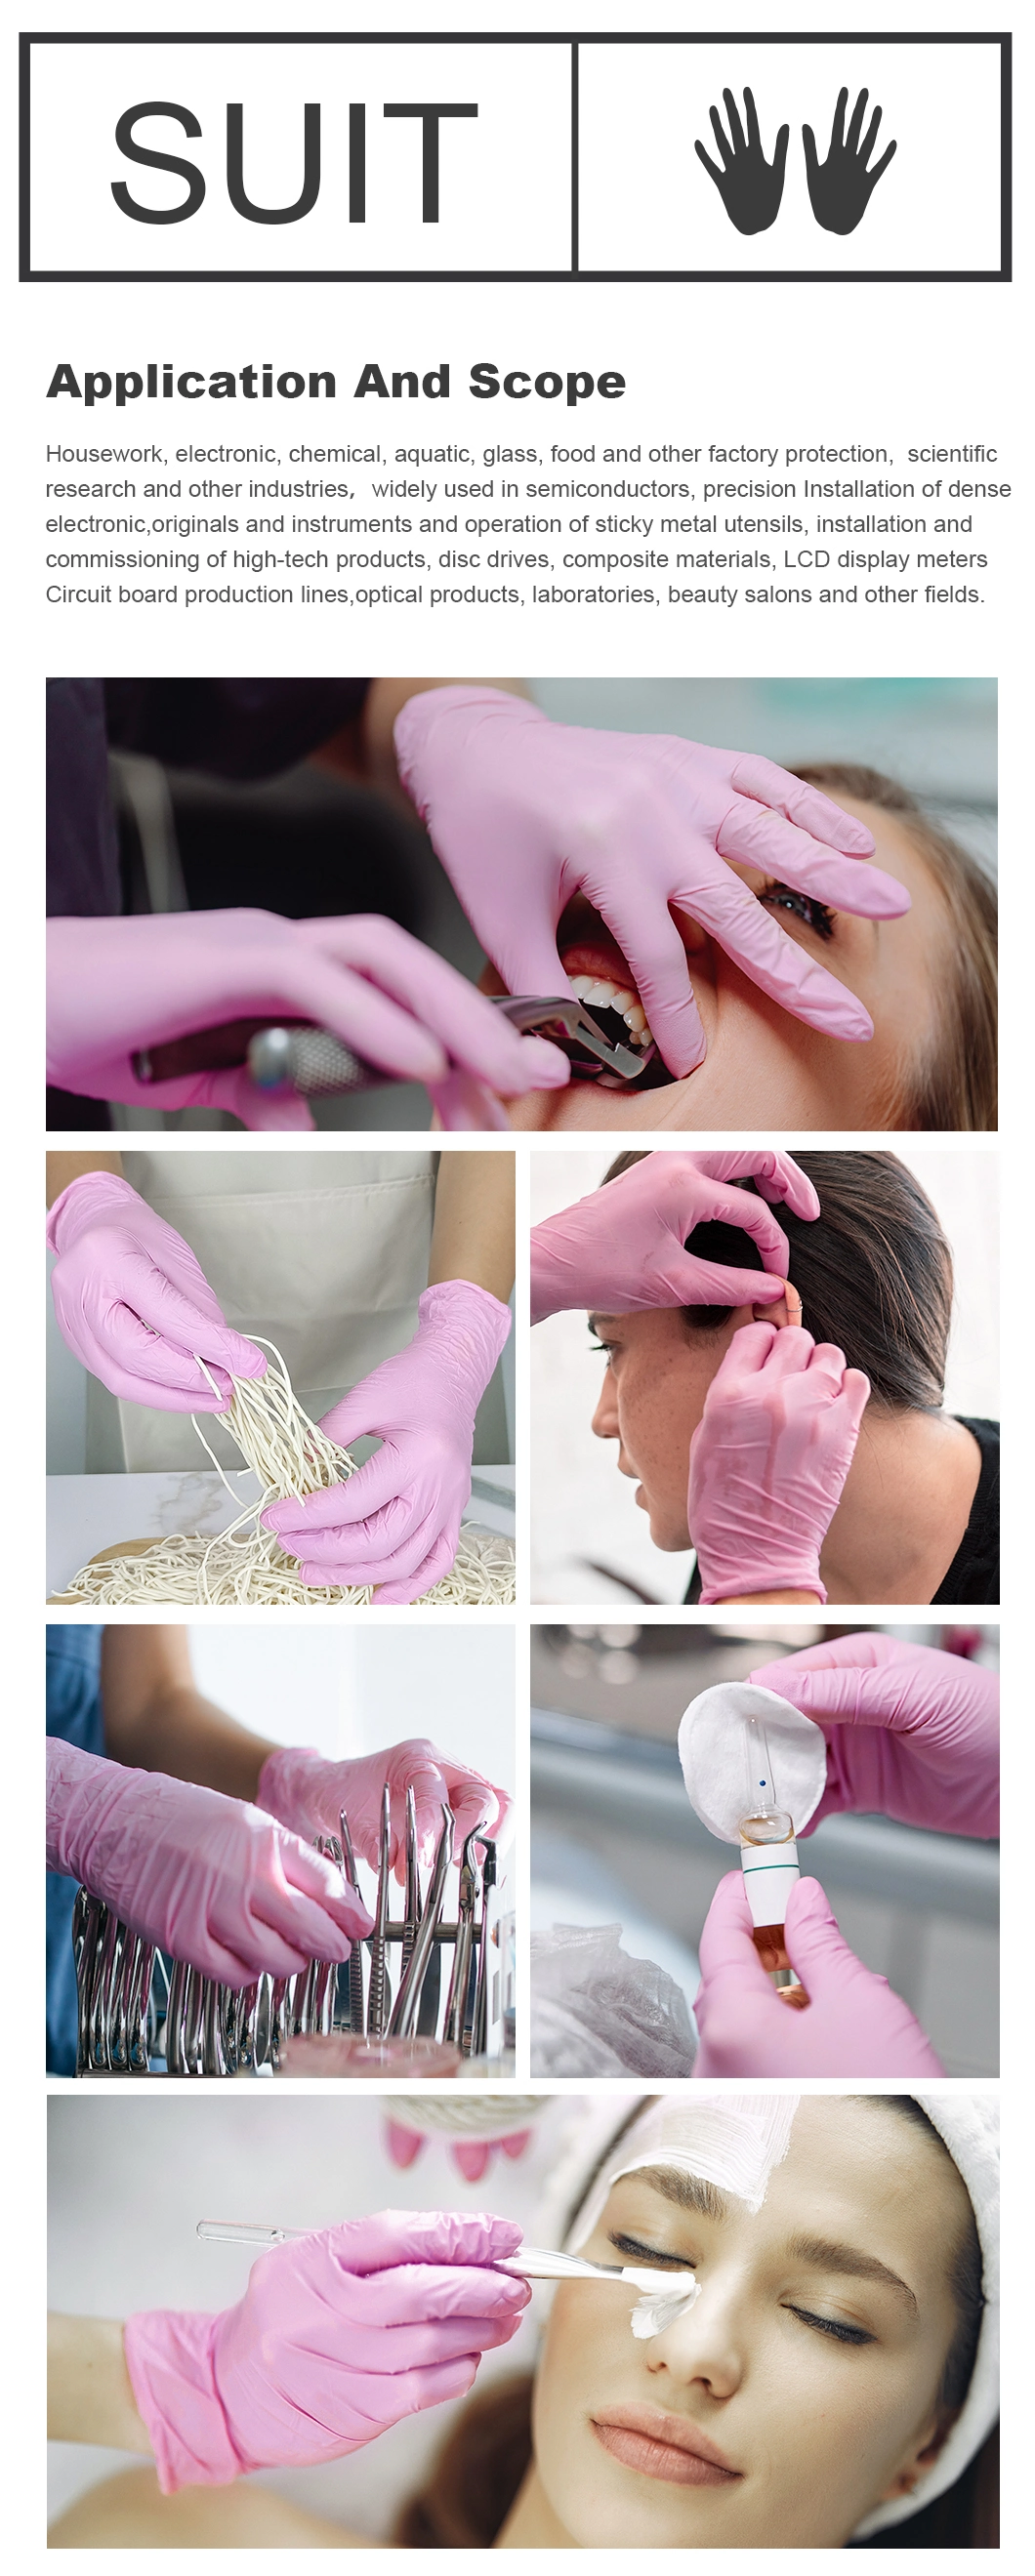 CE FDA Gloves Disposable Powder-Free Inspection Anti-Pollution Industrial Examination Protective Non Medical Working Blue/White/Black Nitrile Gloves